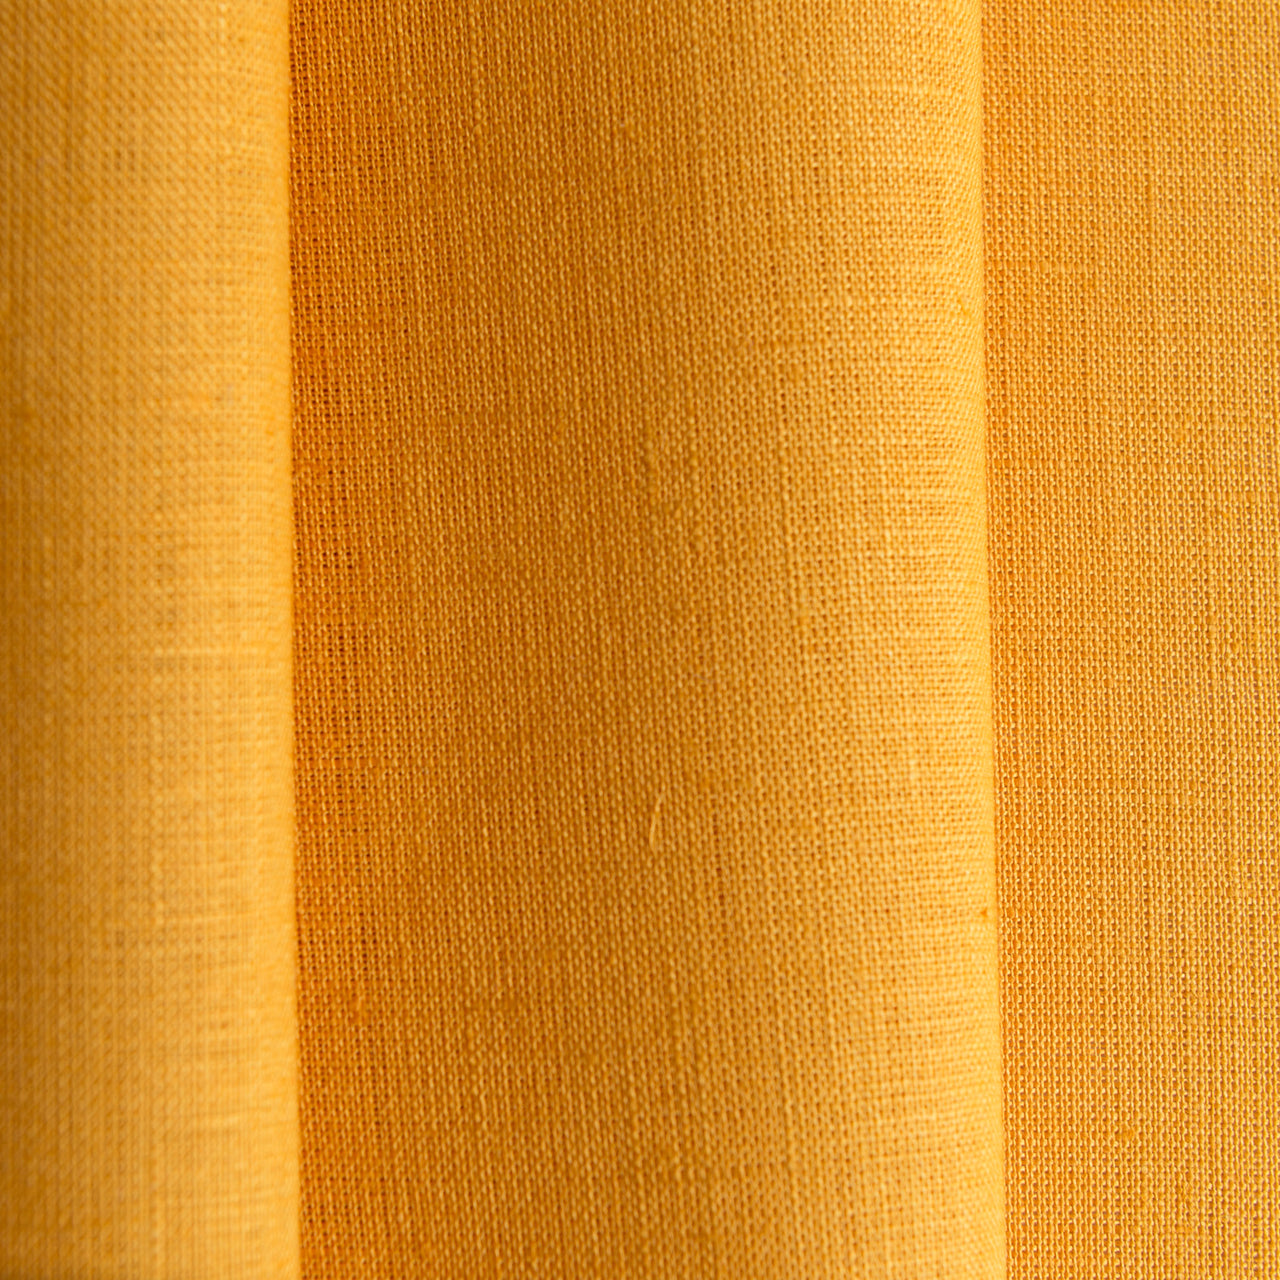 Mustard Yellow Linen Fabric by the Yard - 100% French Natural - Width 52”- 106”